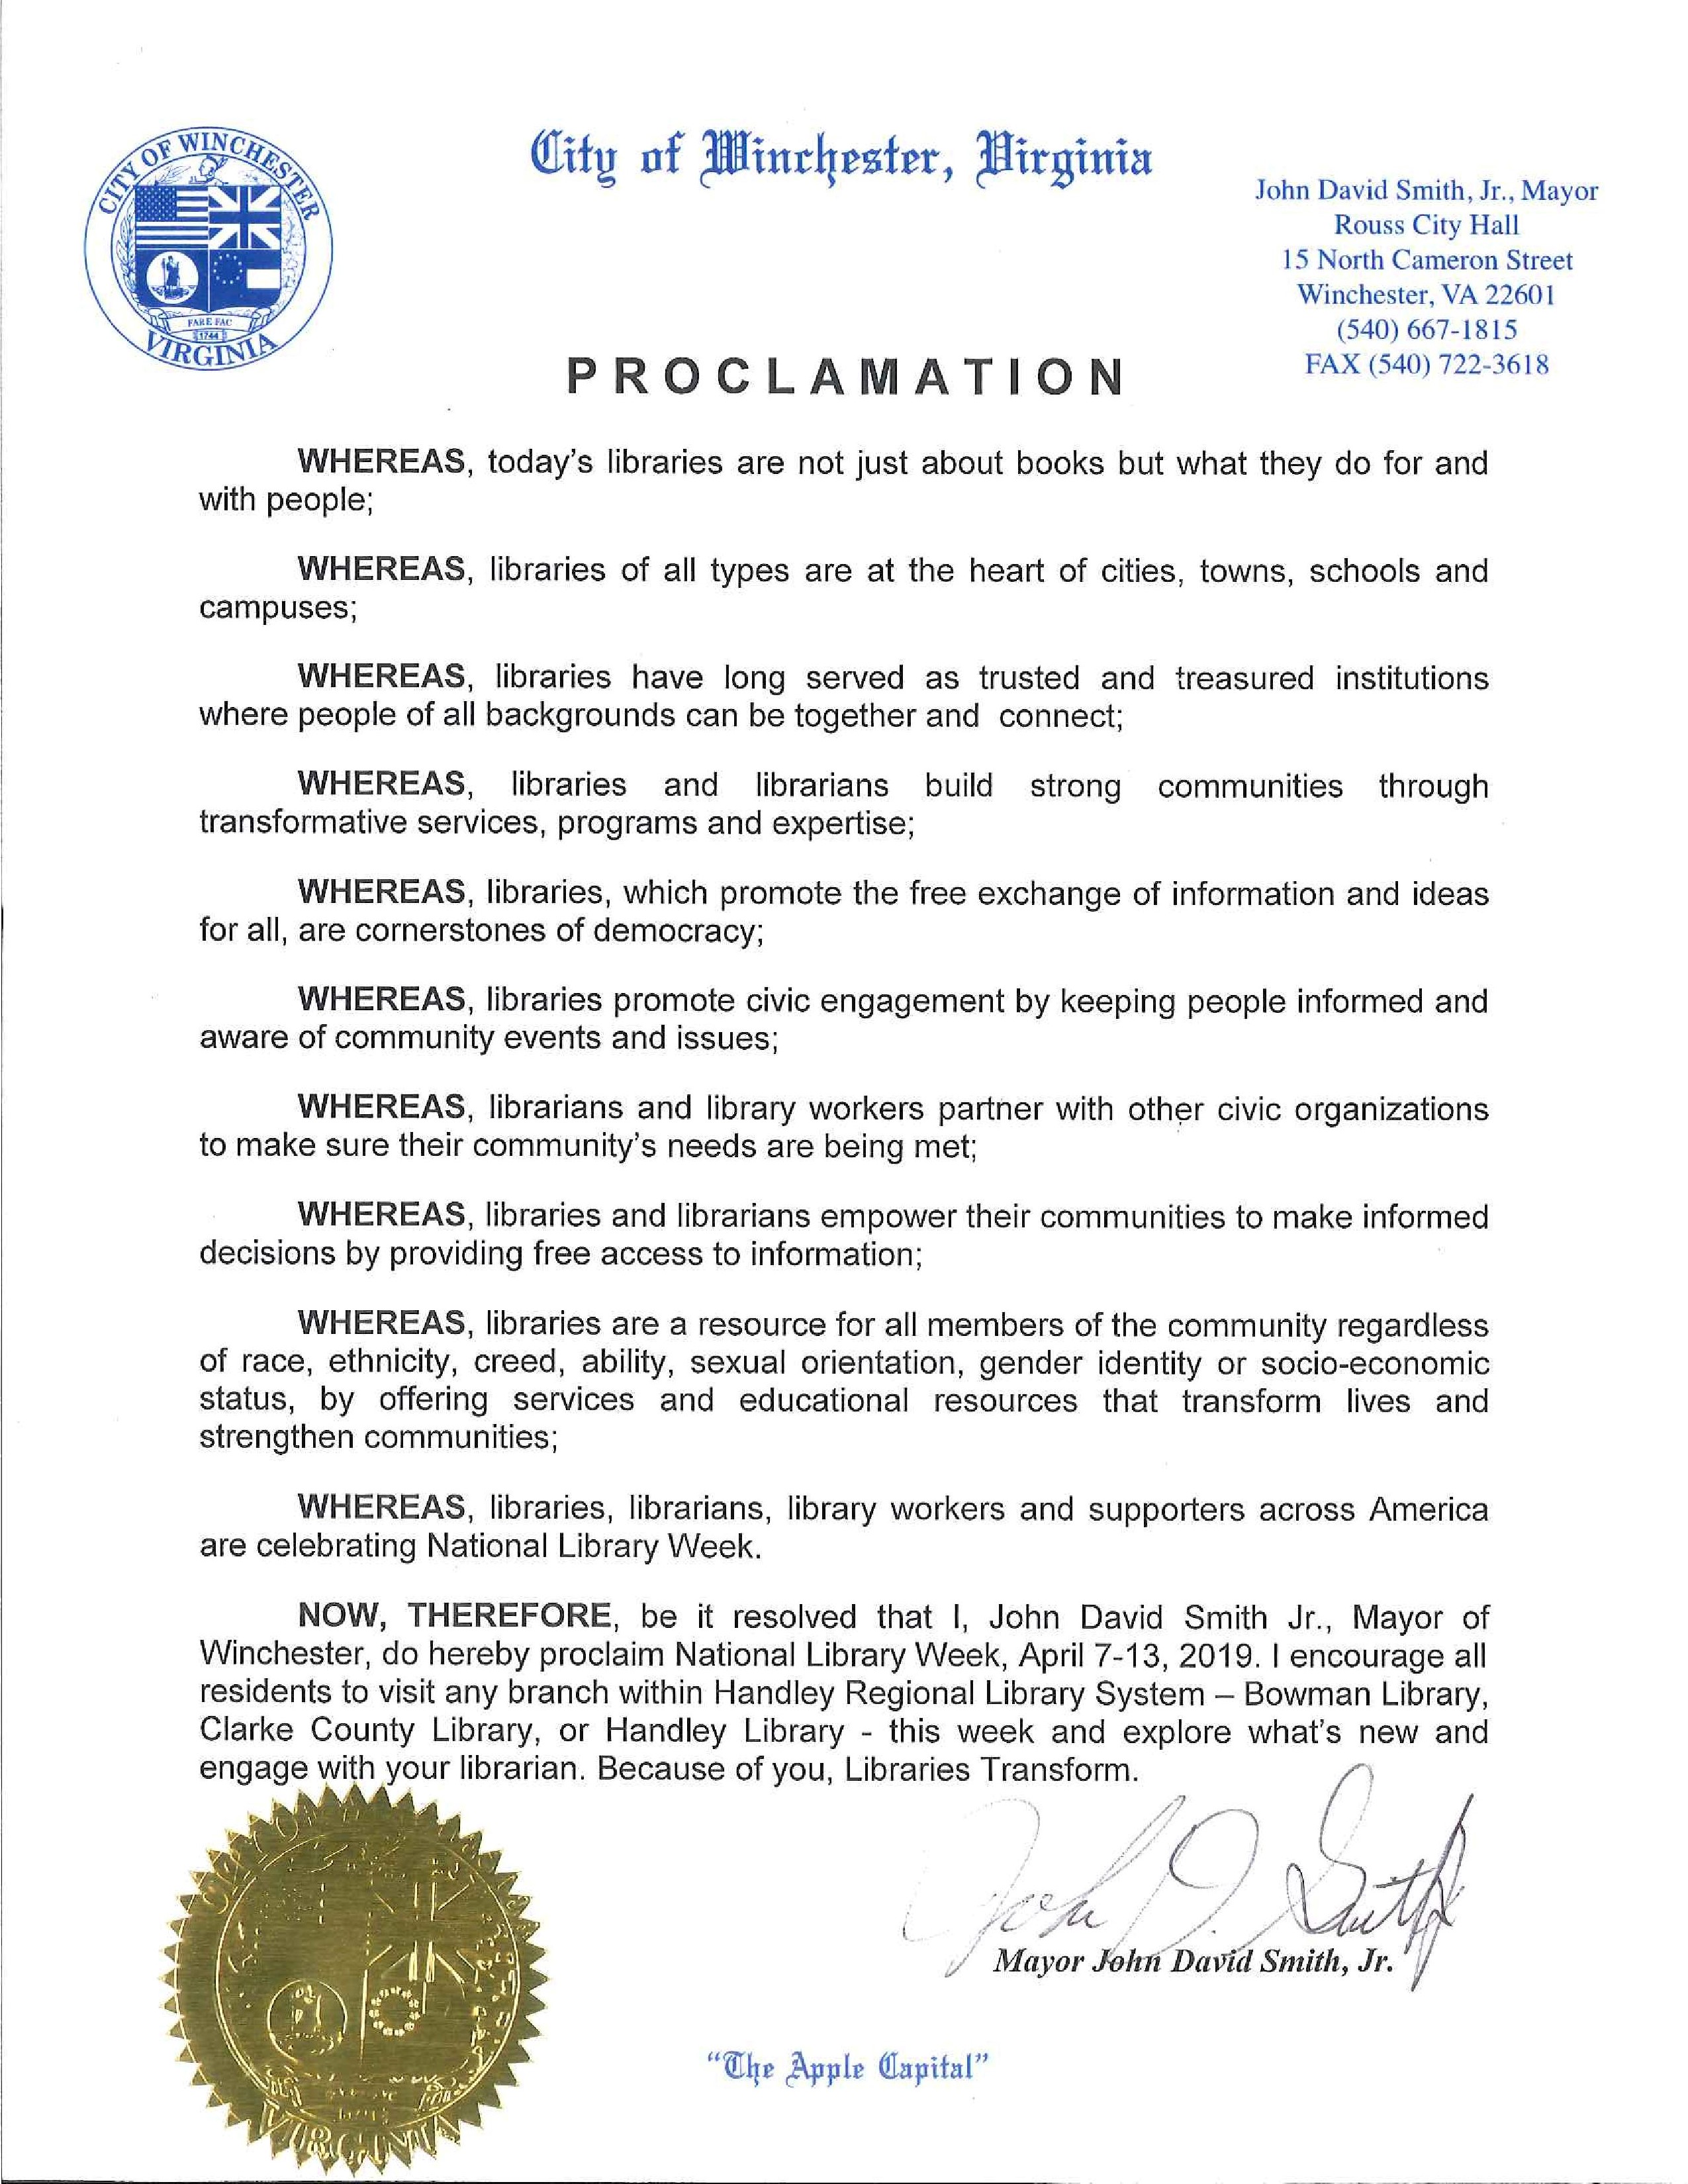 Proclamation for National Library Week